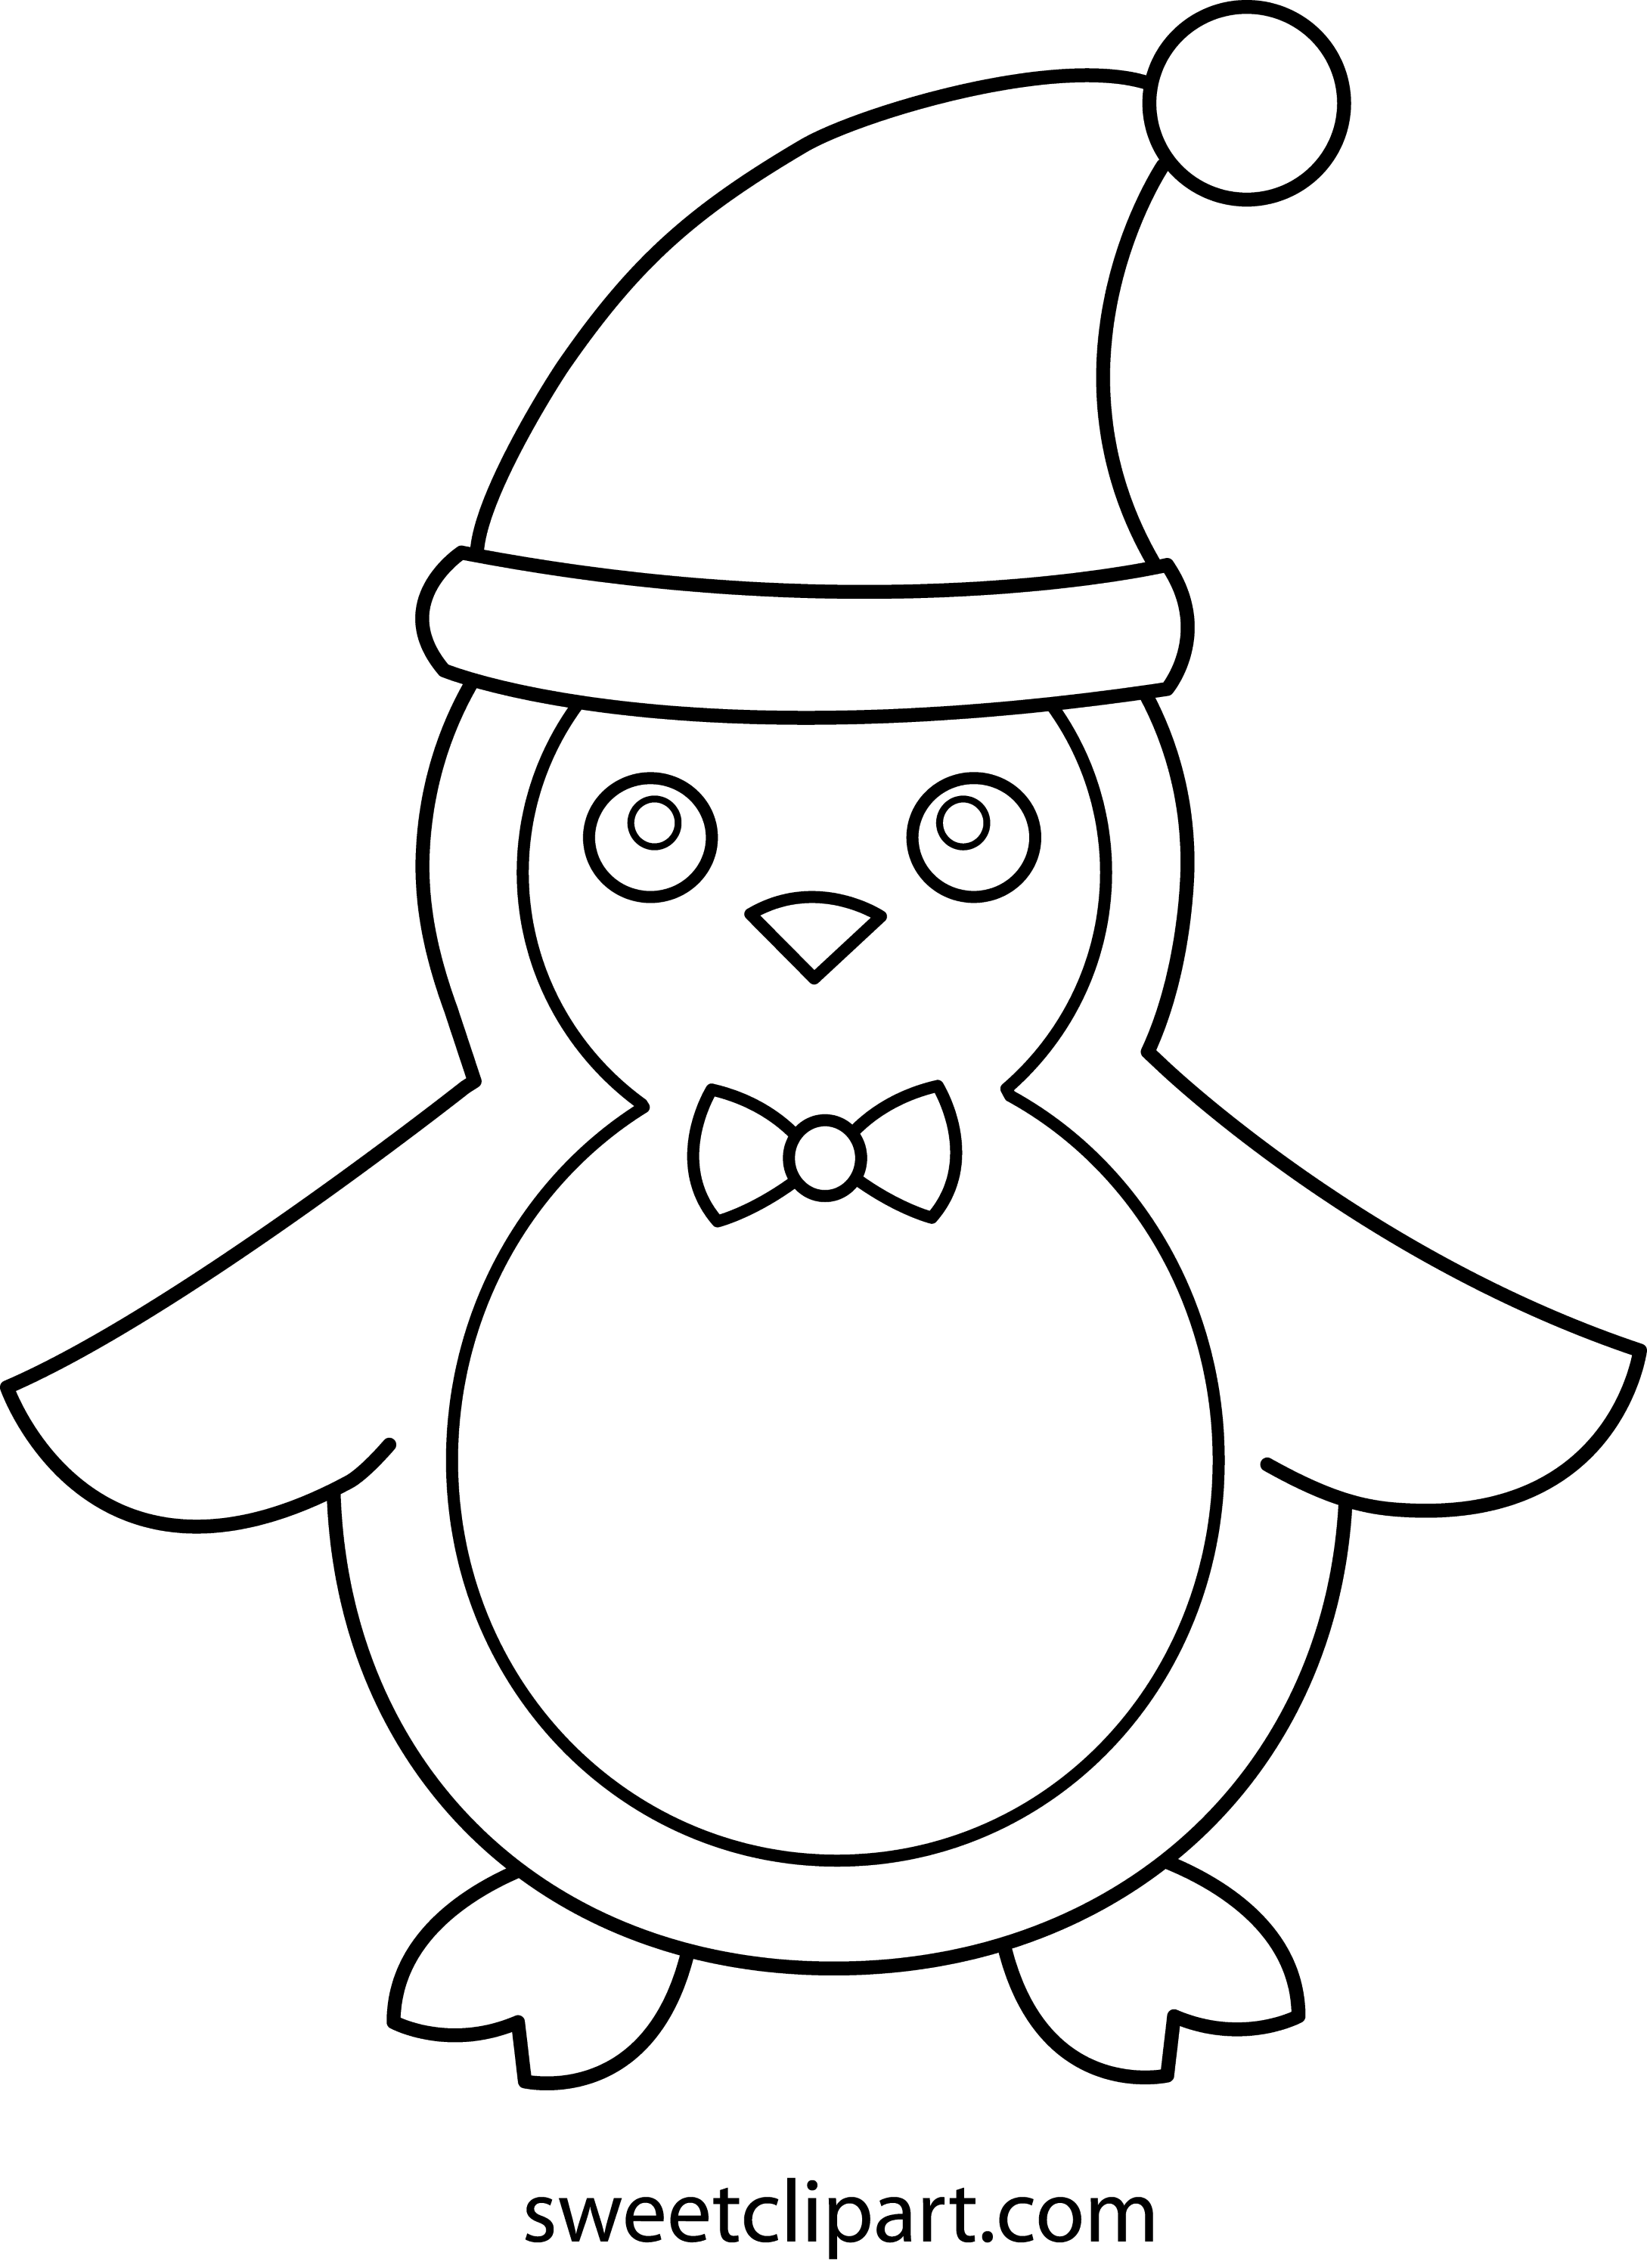 Cute Penguin Clip Art Black And White Sketch Coloring Page